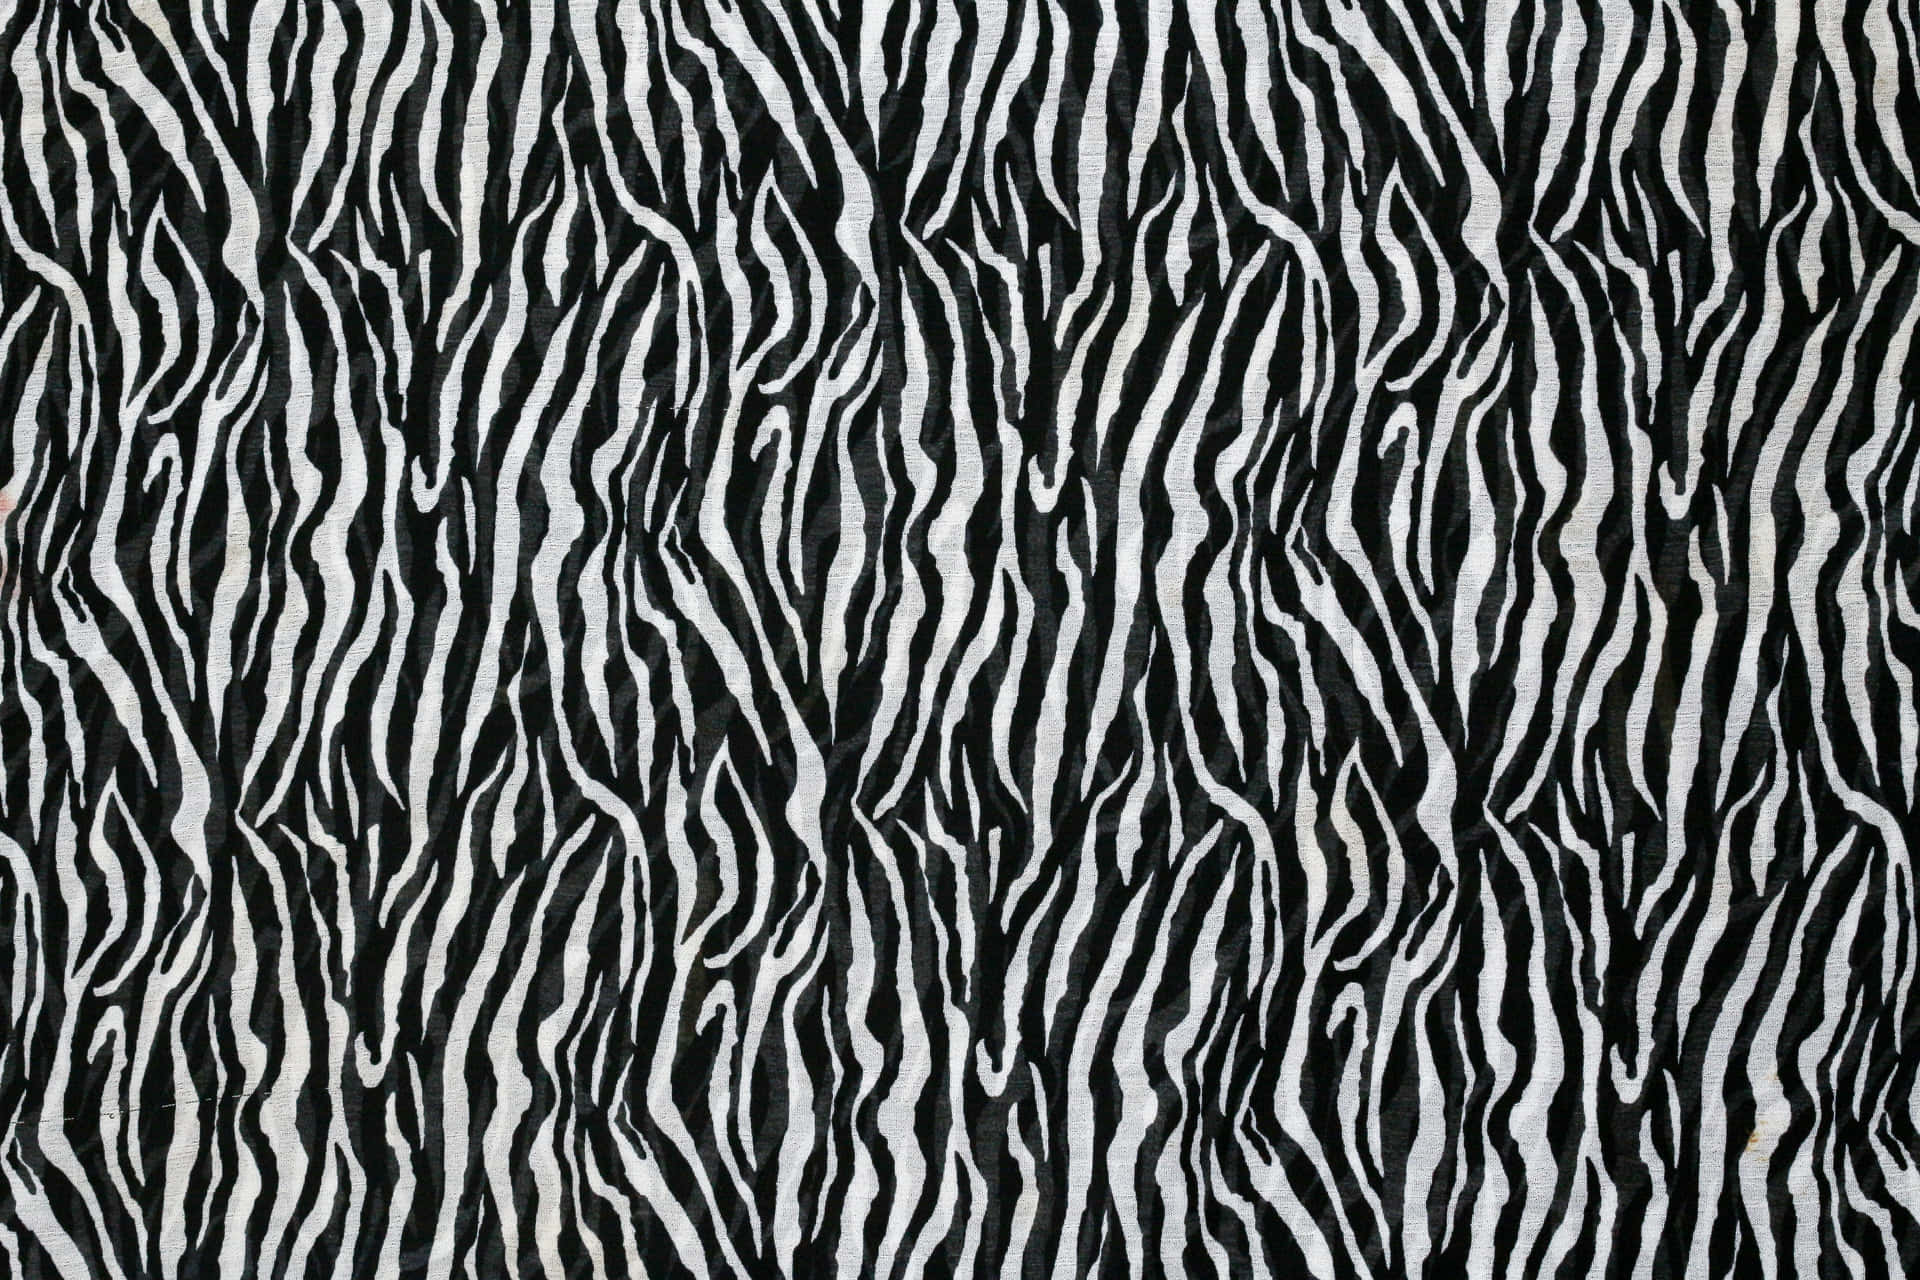 A classic black and white animal print pattern Wallpaper